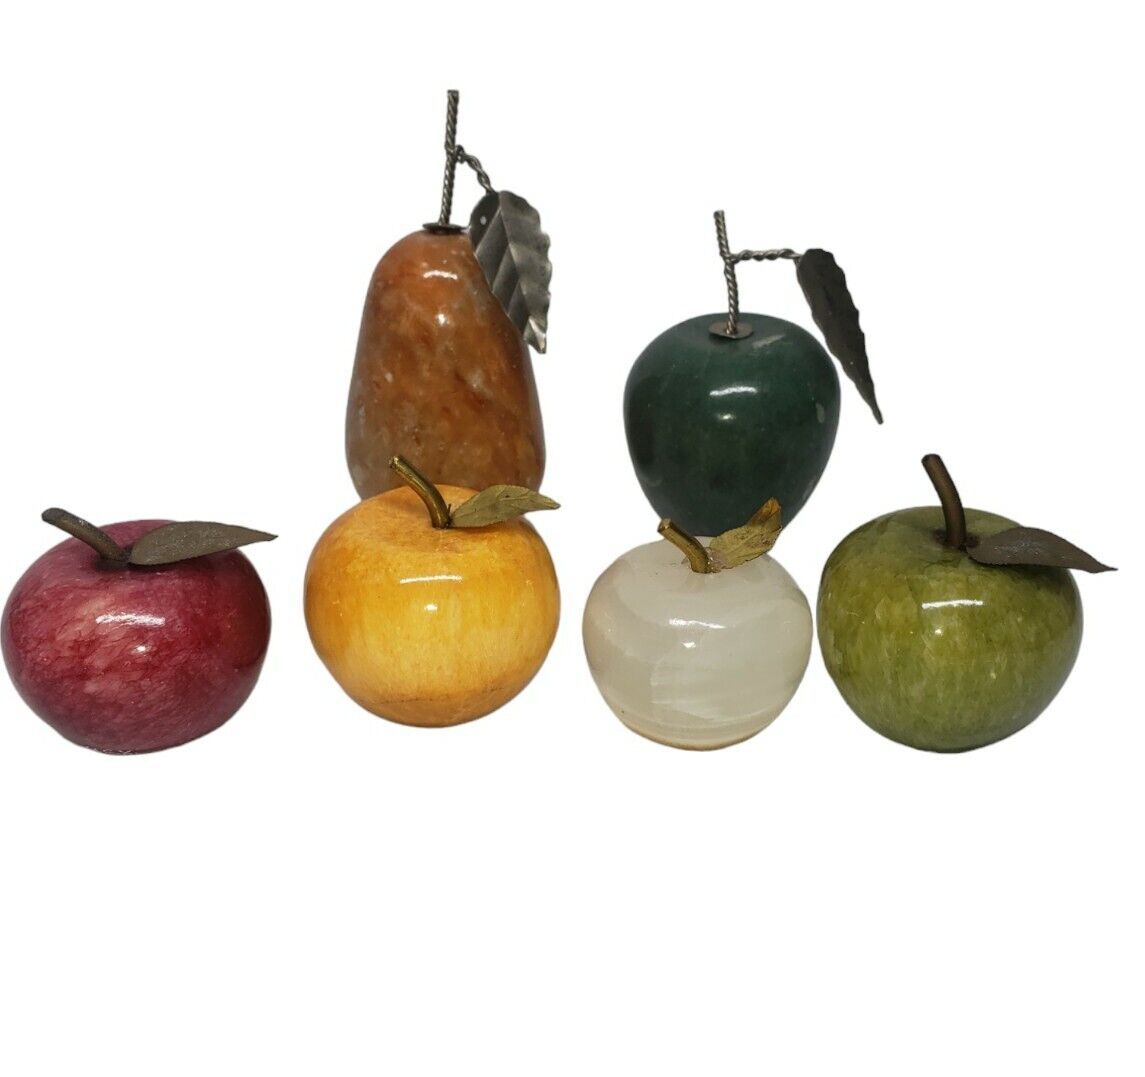 Lot Colored Apples Polished Stones Marble Alabaster Paperweight Copper Stem